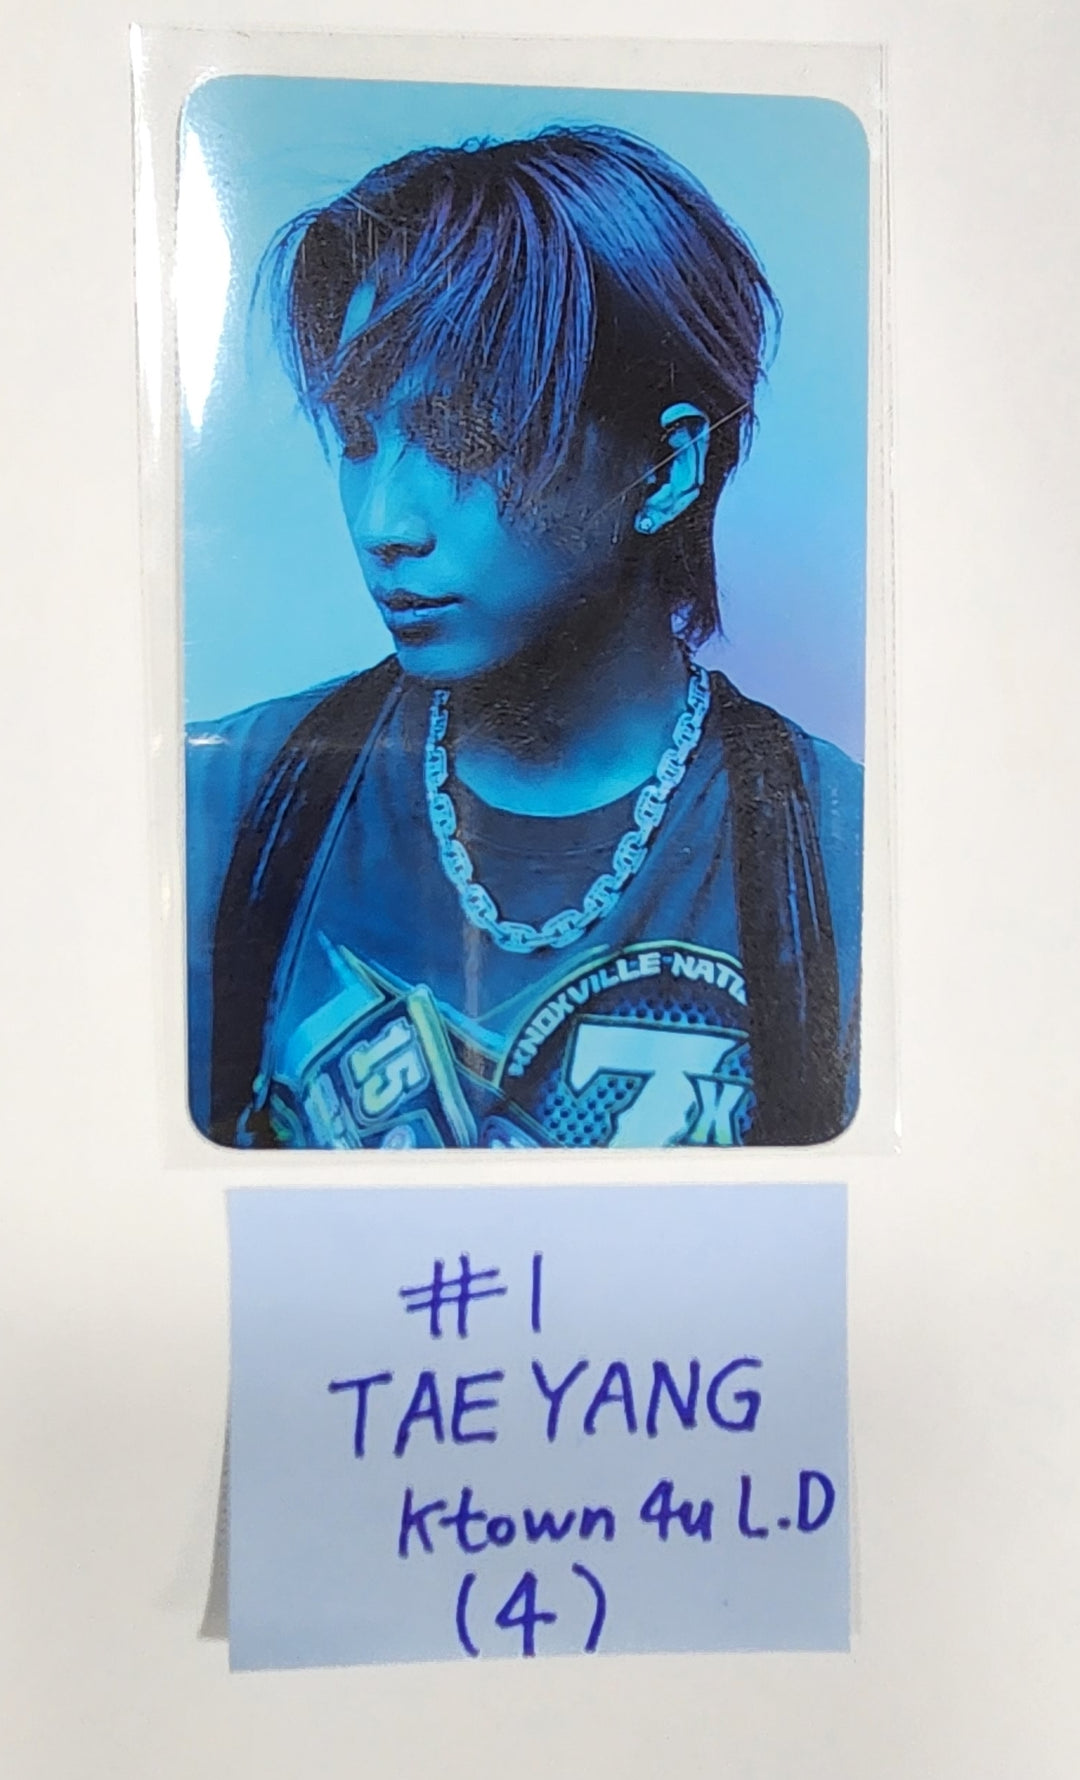 TAEYANG "Down to Earth" - Ktown4U Lucky Draw Event, Drink Event Photocard